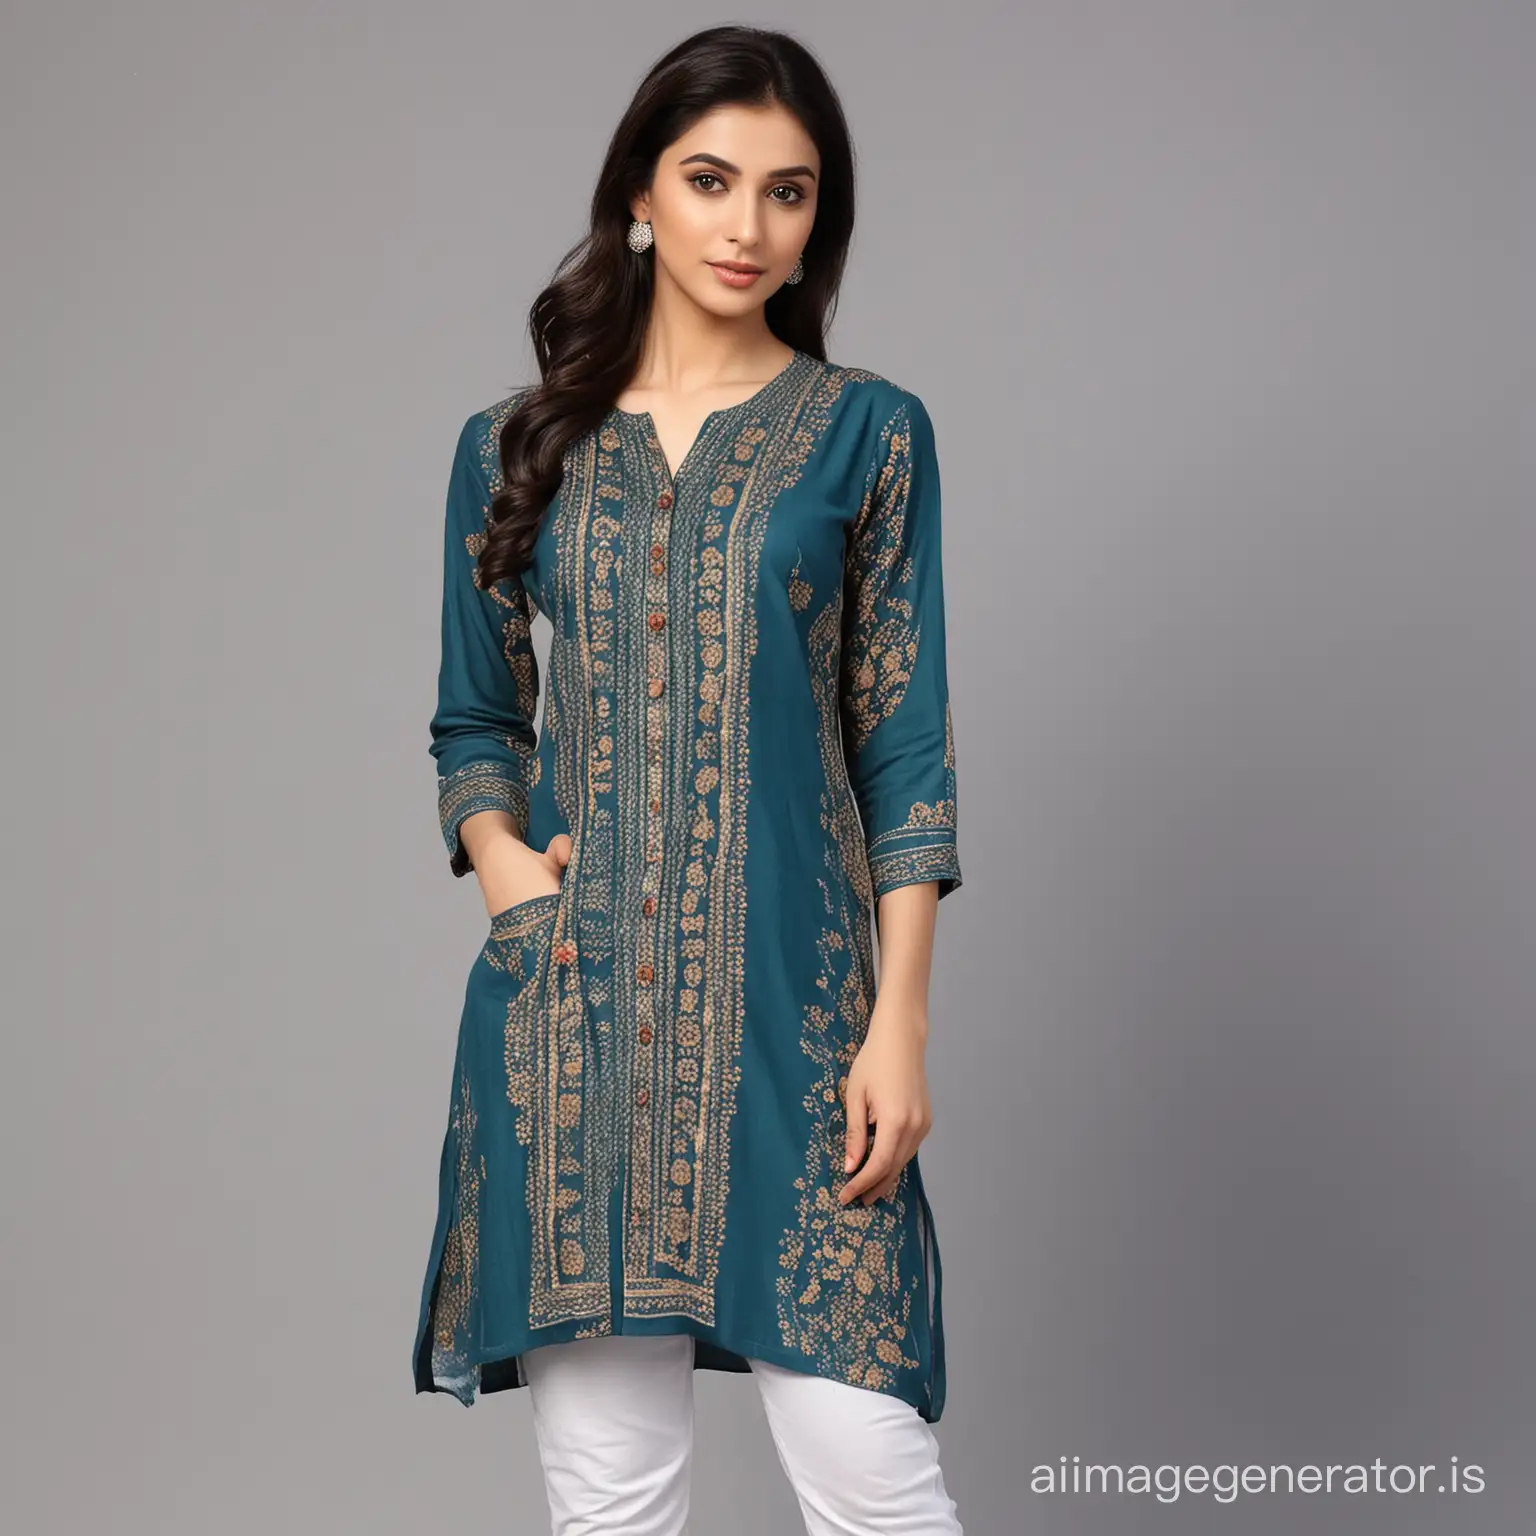 Traditional-Indian-Women-Wearing-Kurtis-in-Vibrant-Colors